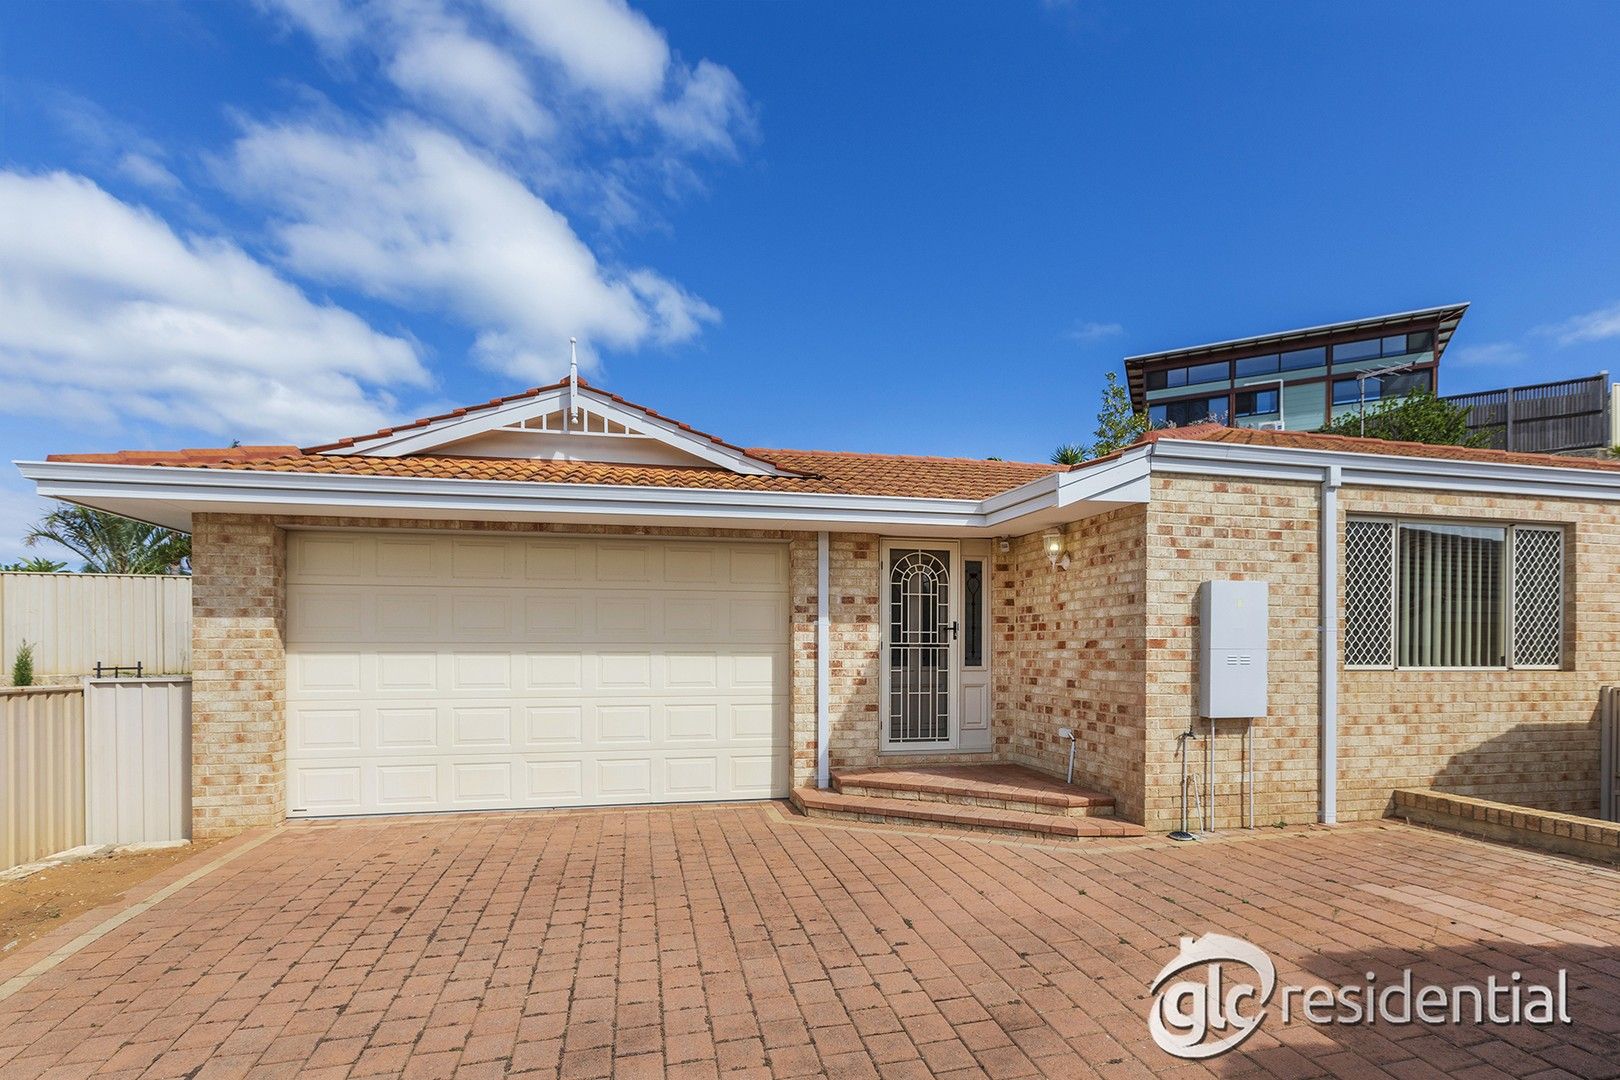 3 bedrooms House in 3/8 Marmand Court COOGEE WA, 6166